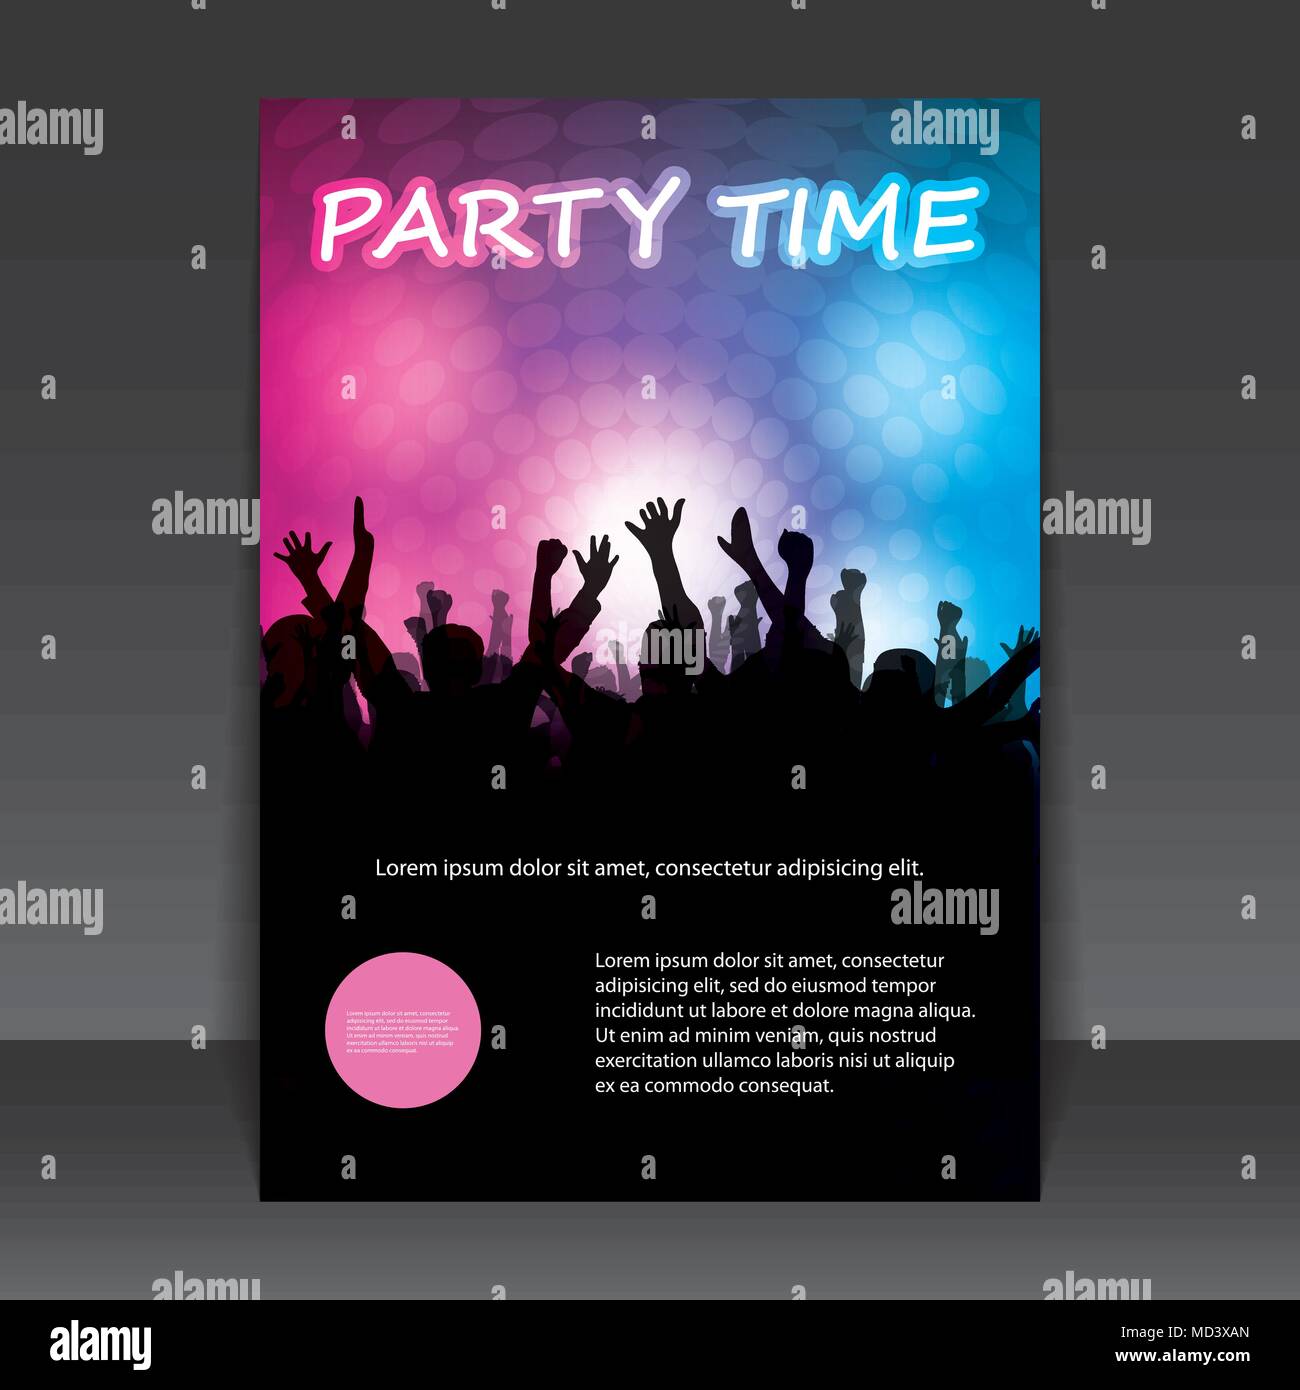 Abstract Colorful Party Flyer Background Or Cover With Dancing Crowd People In The Dark Silhouettes With Waving Hands And Bright Light Poster Stock Vector Image Art Alamy